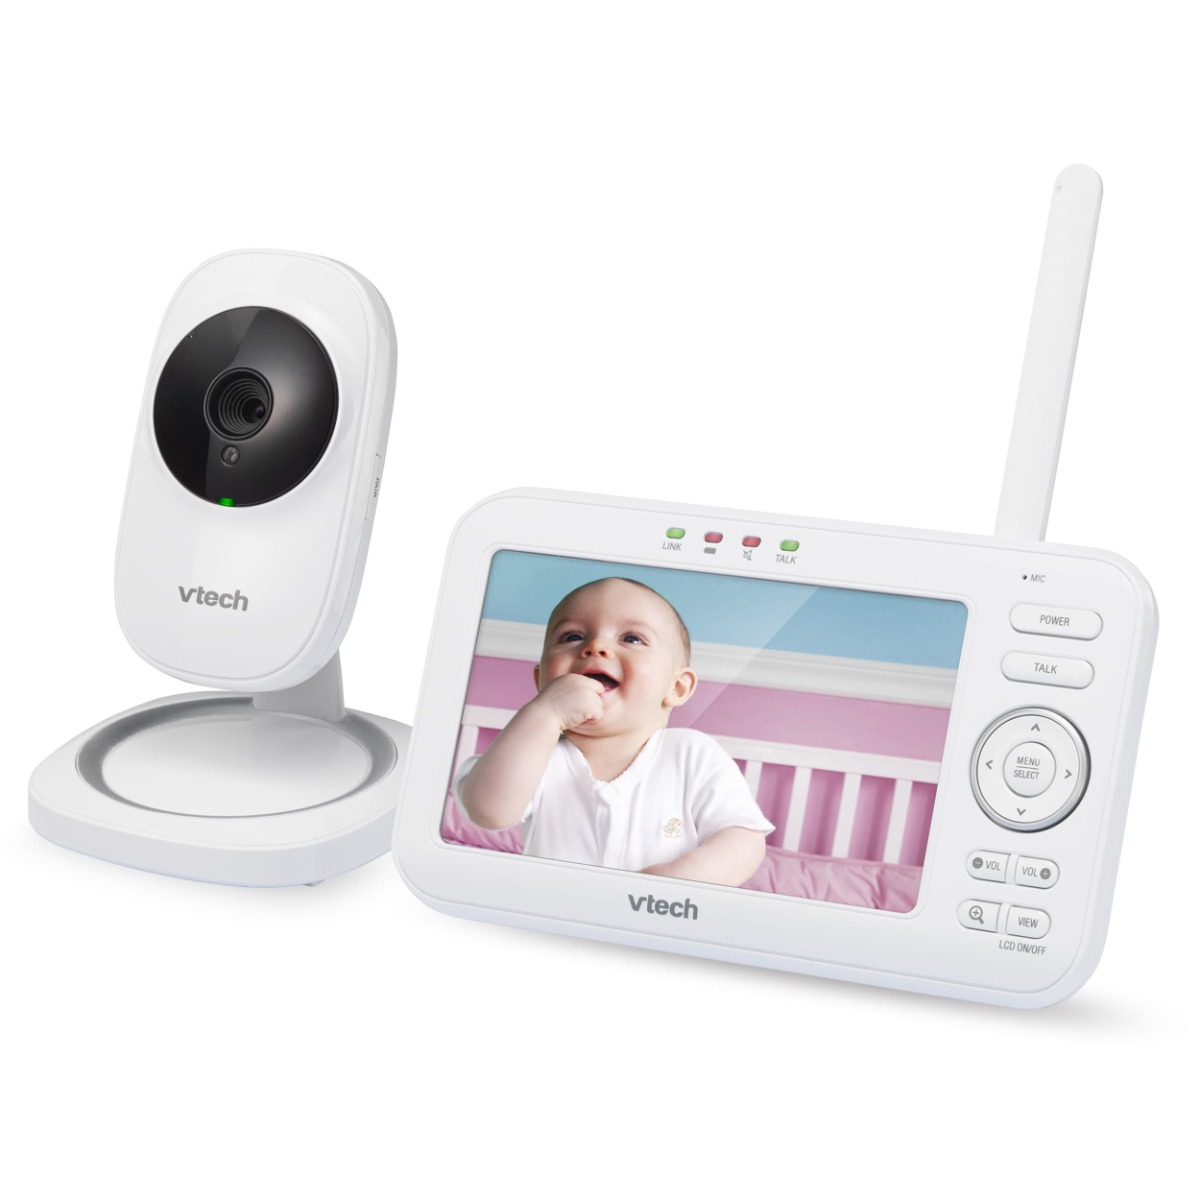 Vtech VM5251 5" Digital Video Baby Monitor with Full-Color and Automatic Night Vision